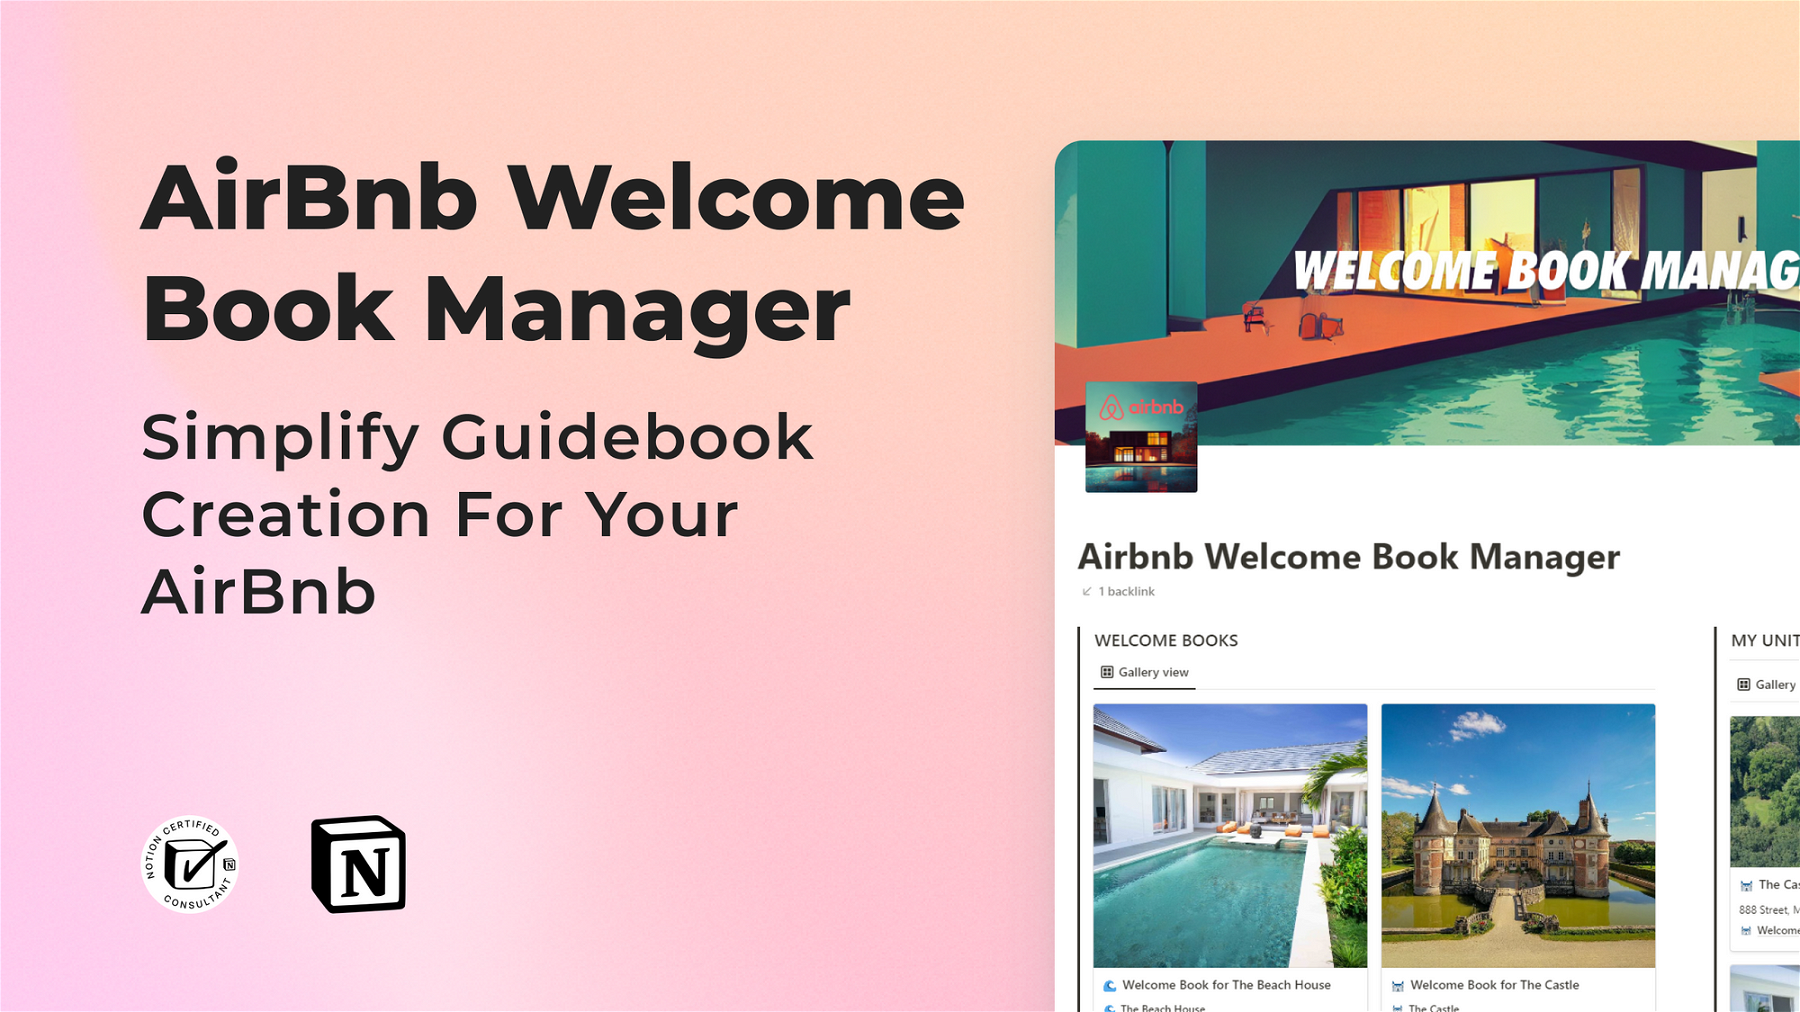 ðŸ“– AirBnb Welcome Book Manager by iManage!